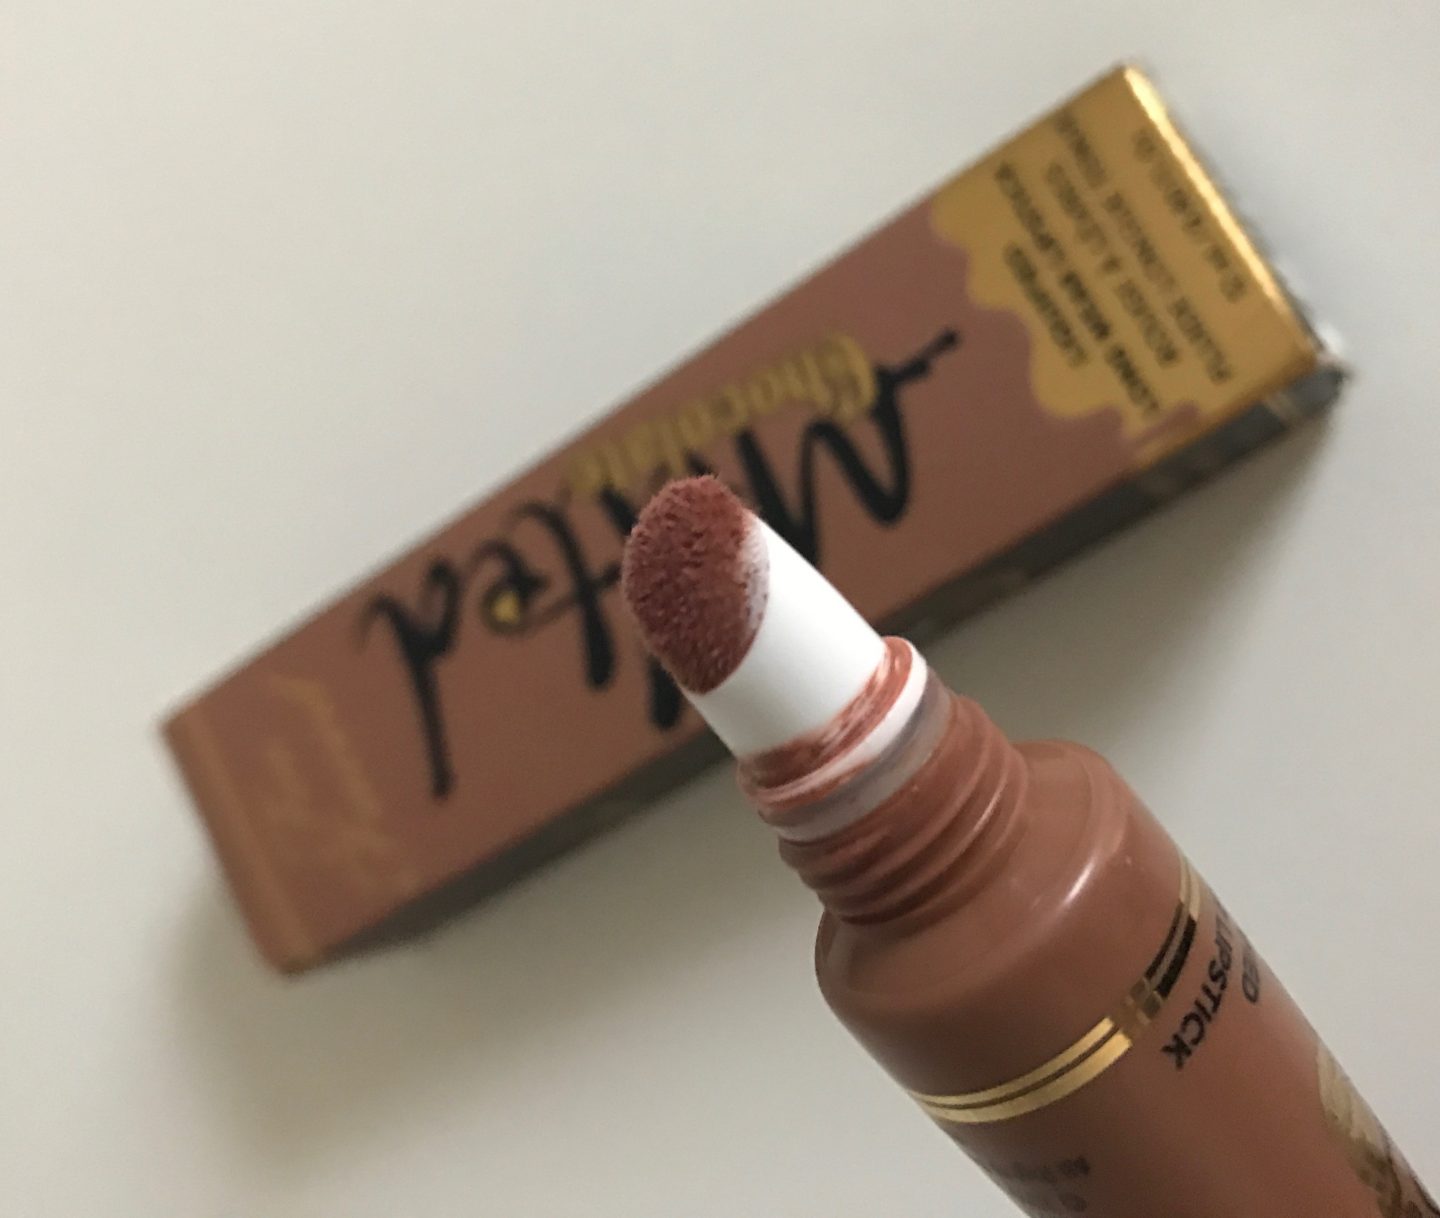 Too Faced Melted Chocolate Liquid Lipstick